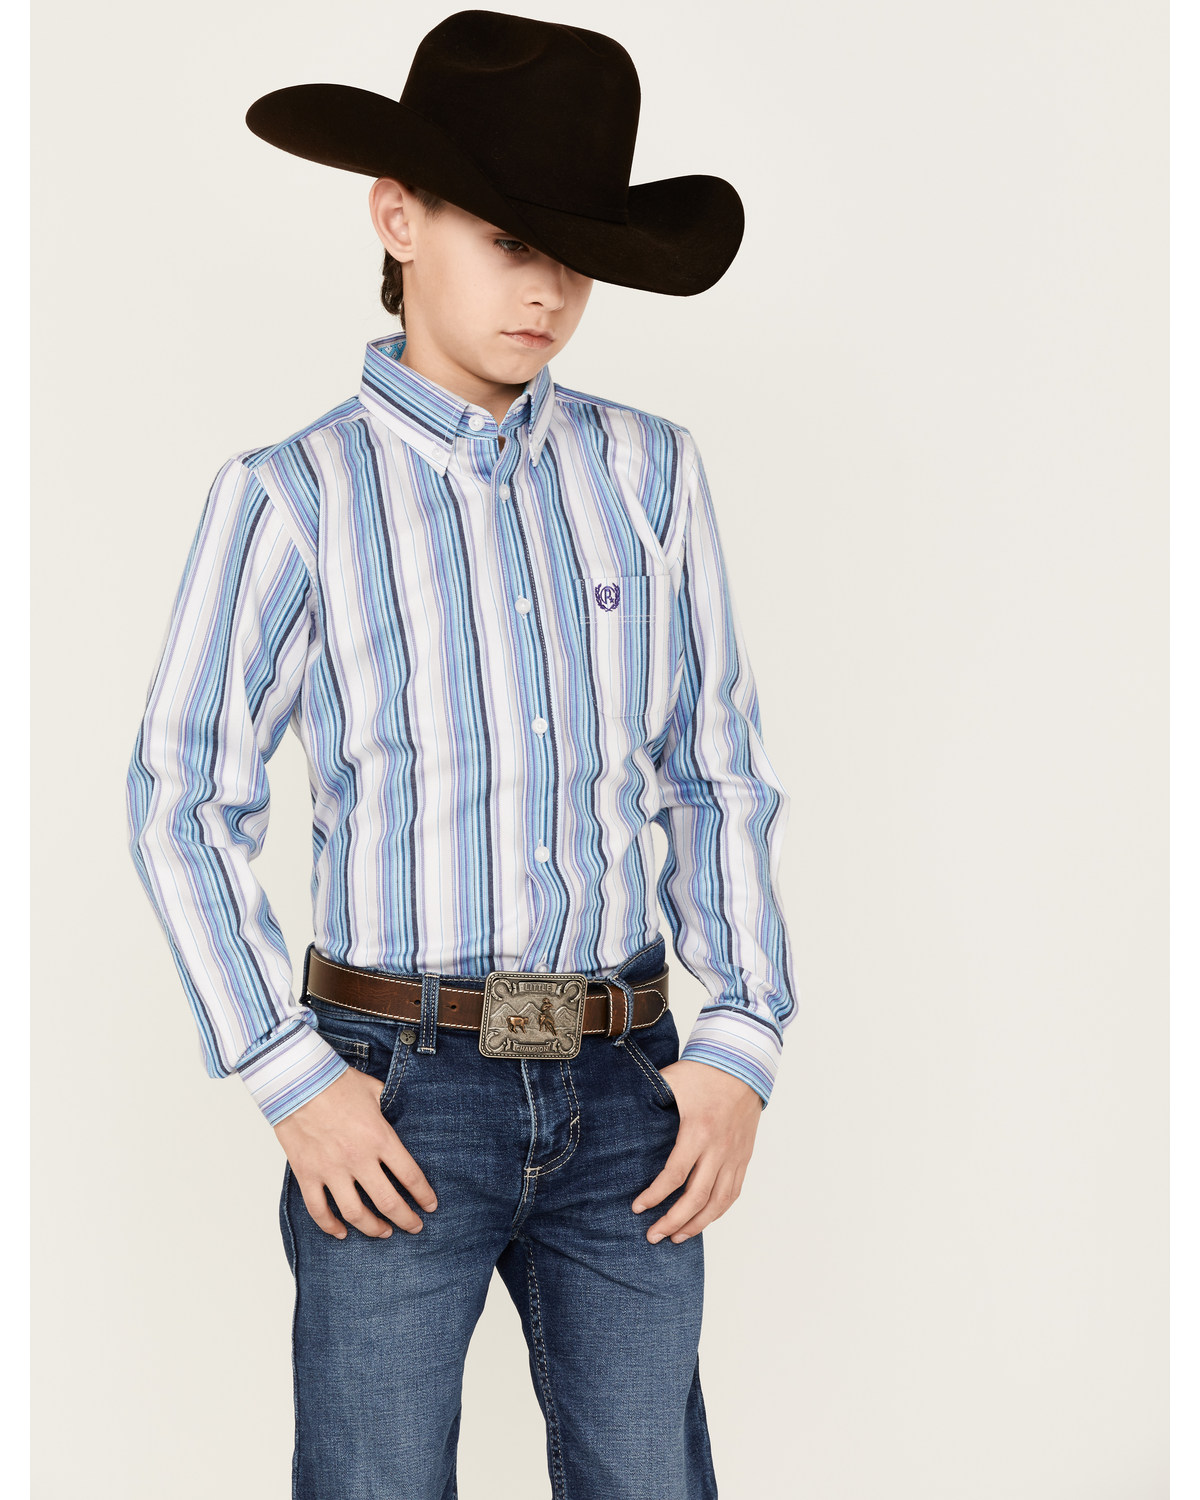 Panhandle Boys' Striped Long Sleeve Button-Down Western Shirt